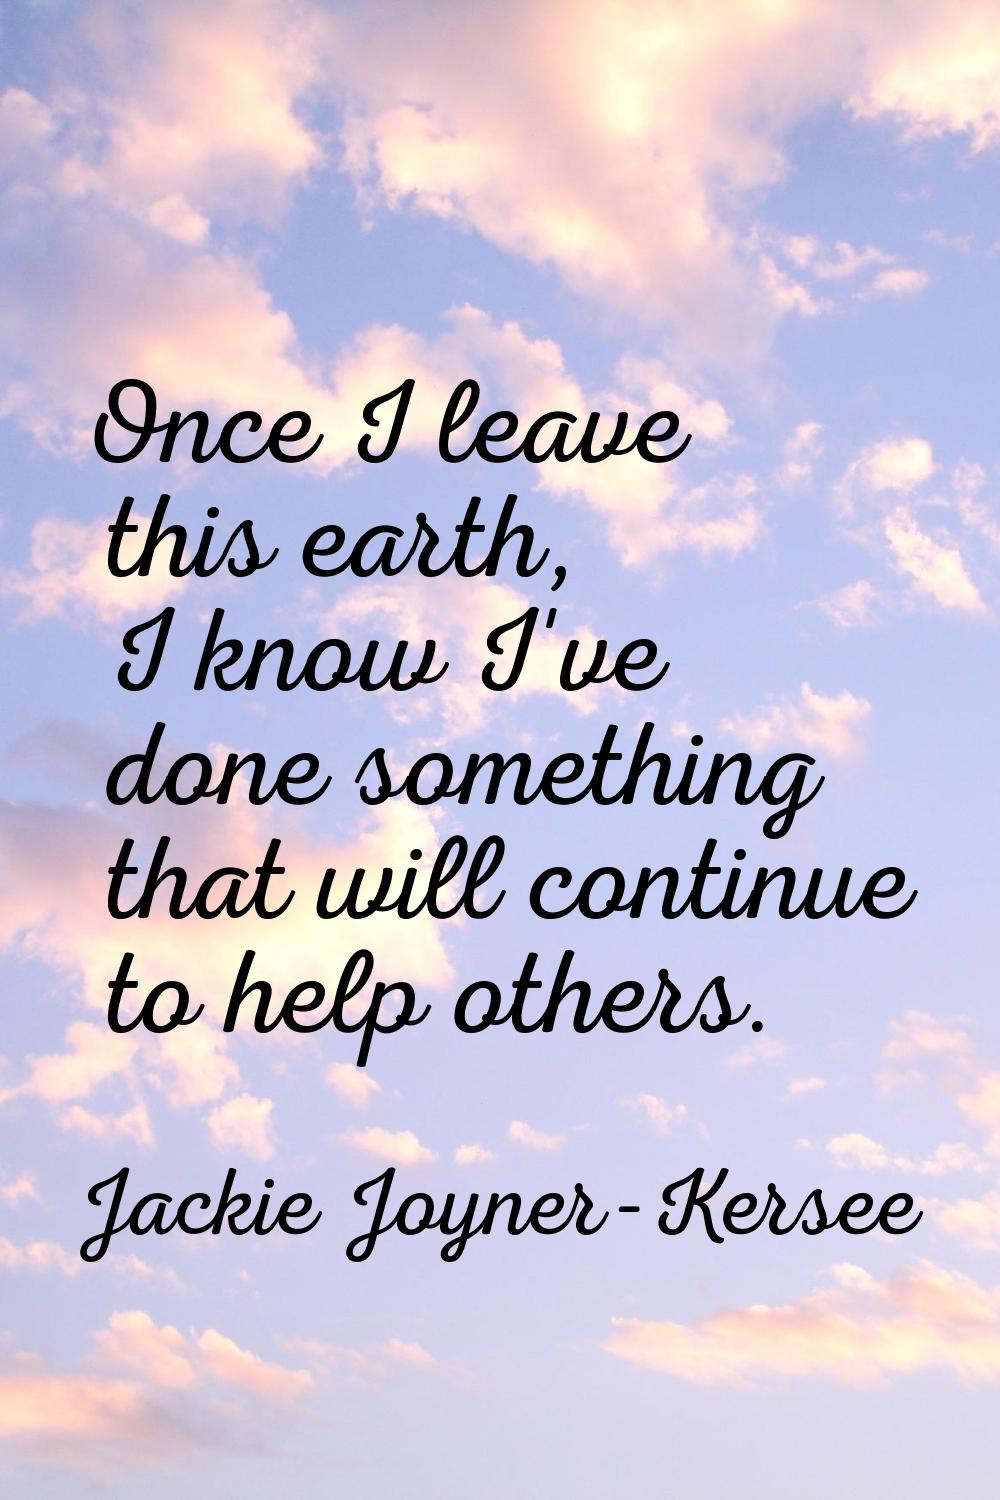 Once I leave this earth, I know I've done something that will continue to help others.